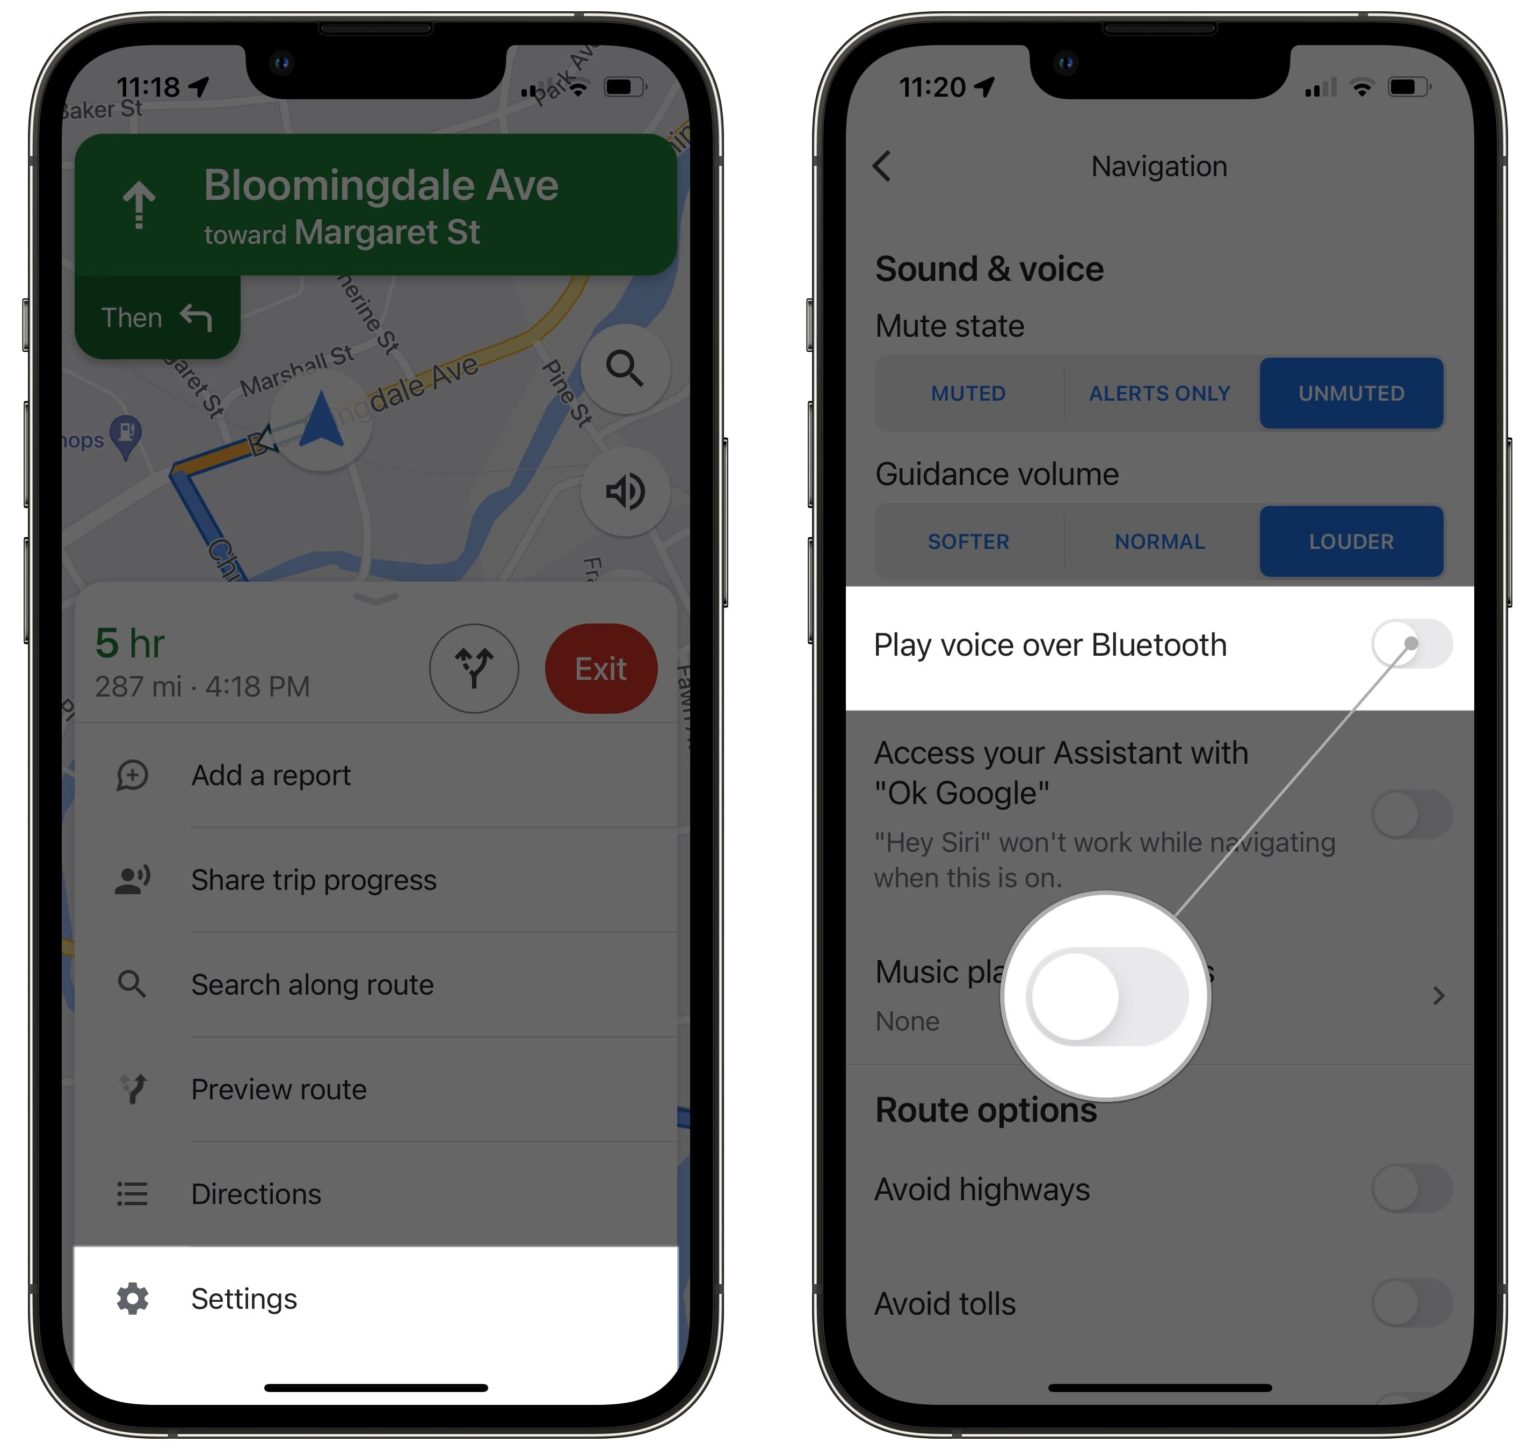 Turn Off Play Voice Over Bluetooth In Google Maps On Iphone 1536x1450 